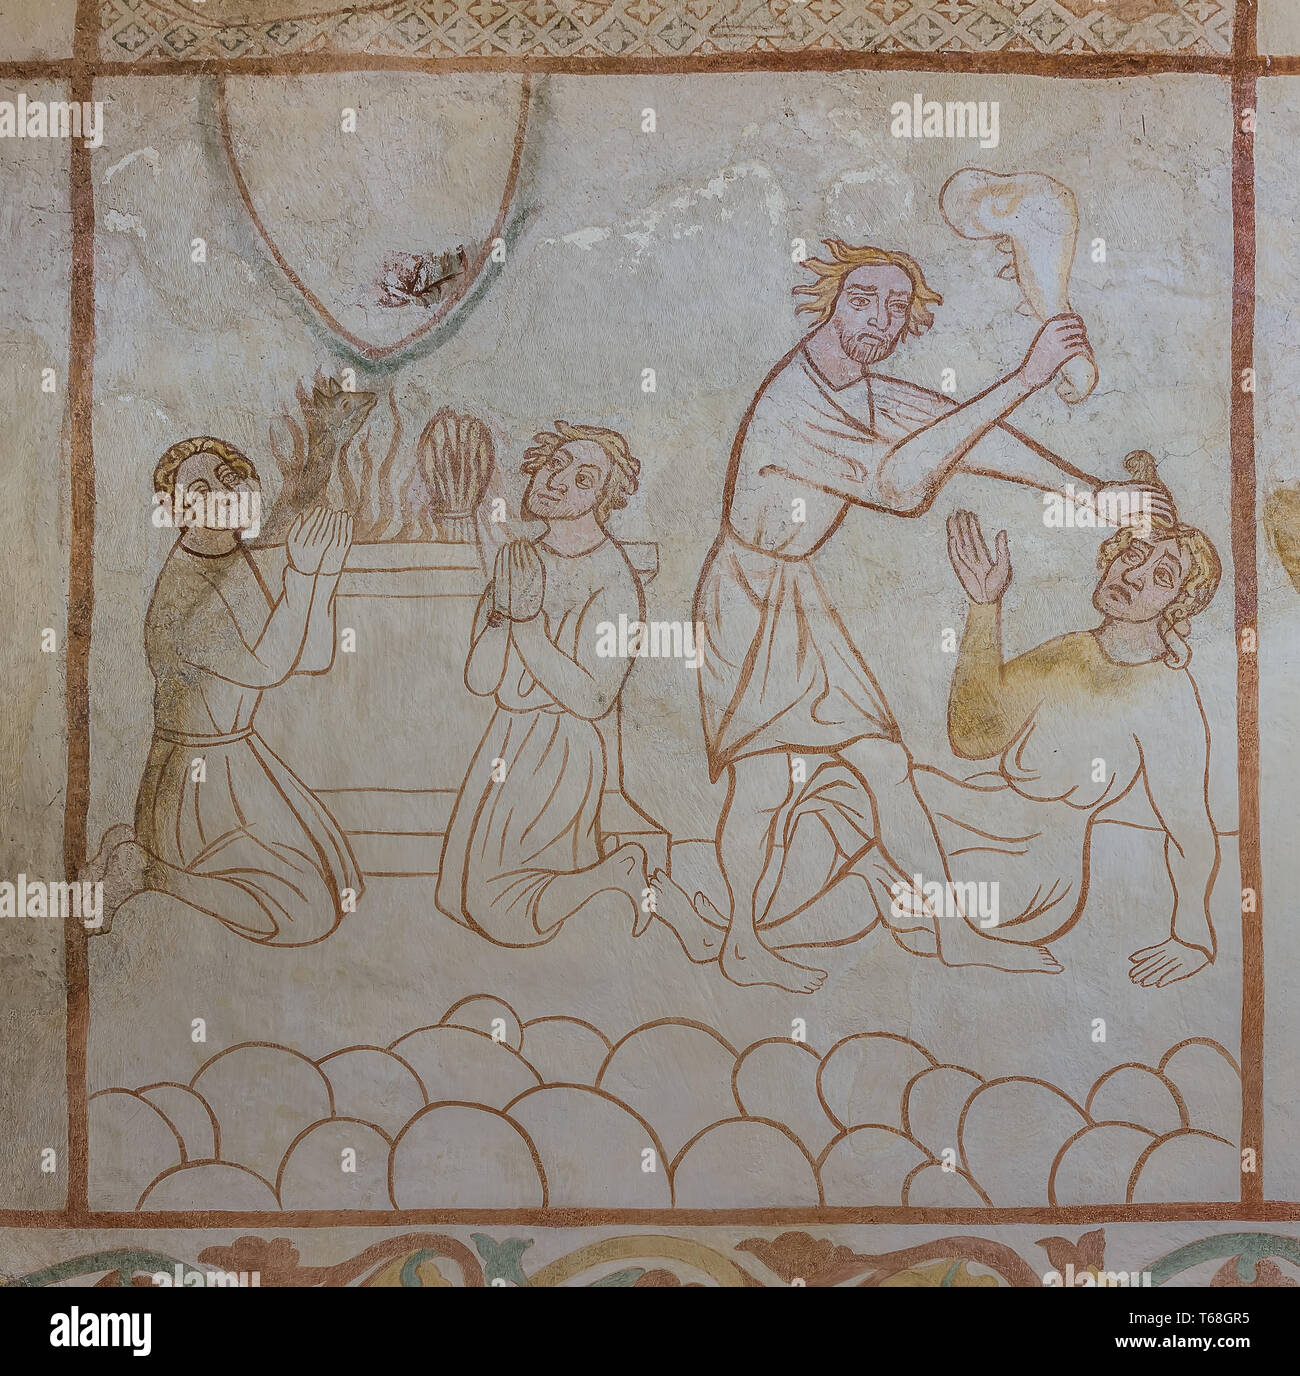 Sacrifices to God and Cain slaying Abel, a 500 years old gotic mural in Tirsted church, Denmark, April 17, 2019 Stock Photo